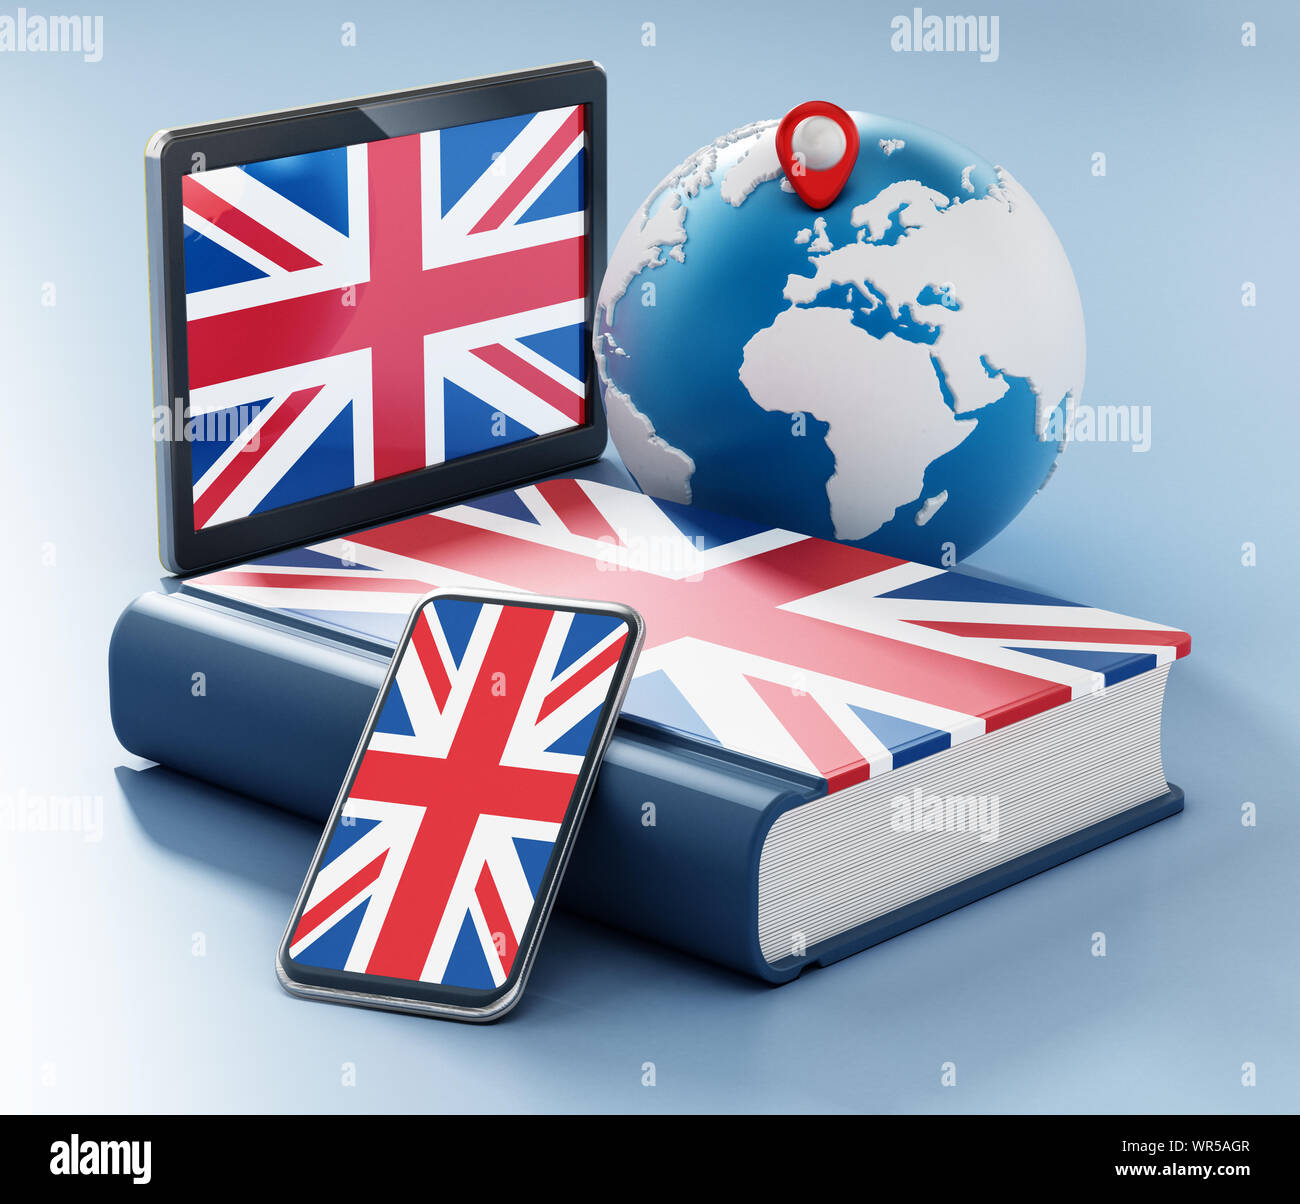 Dictionary, smartphone and tablet pc with British flag along the globe. 3D illustration. Stock Photo